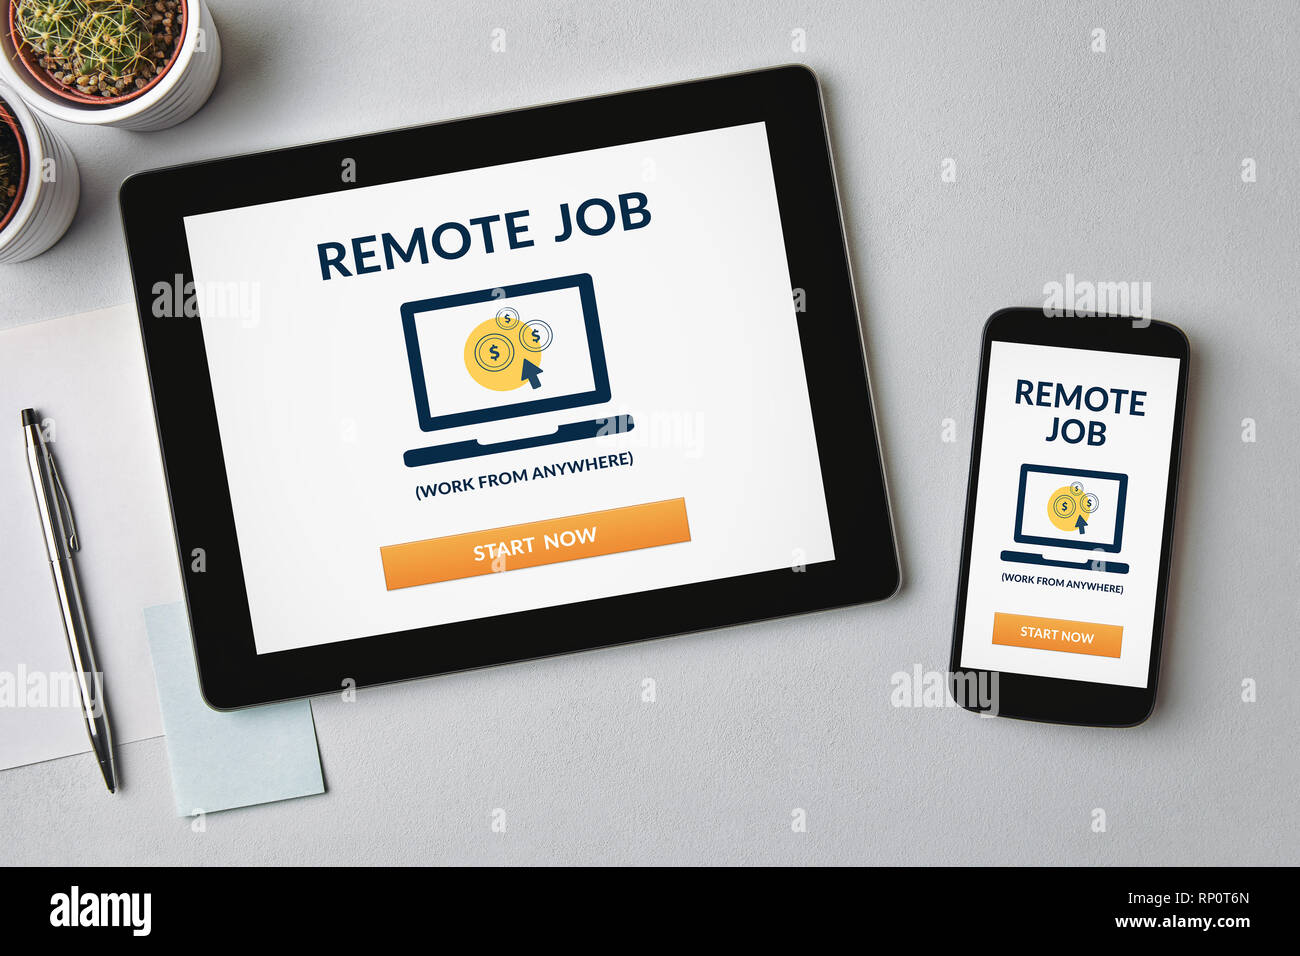 Remote job concept on tablet and smartphone screen over gray table. All screen content is designed by me. Flat lay Stock Photo